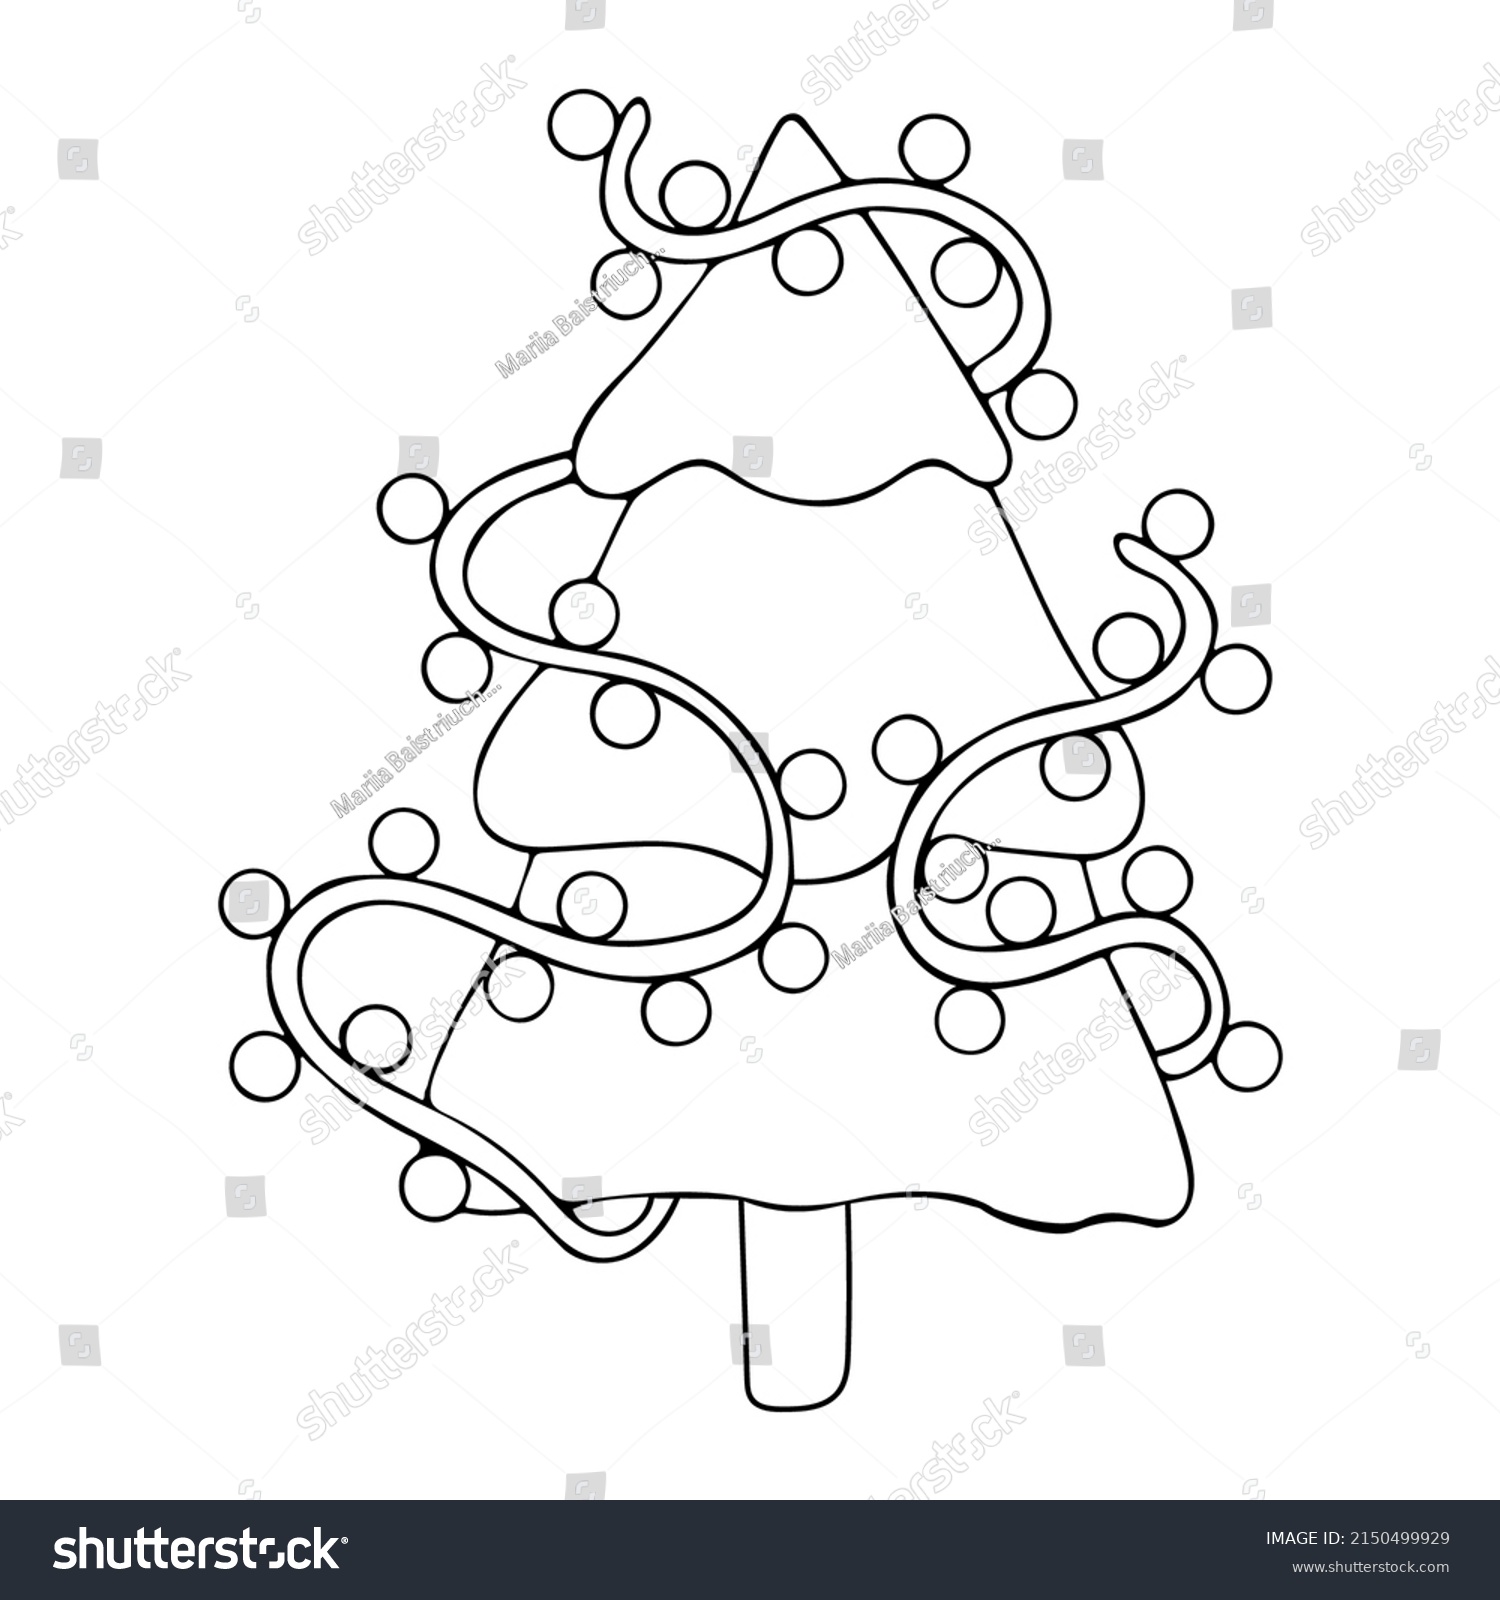 Coloring Page Christmas Tree Decorated Garlands Stock Vector (Royalty